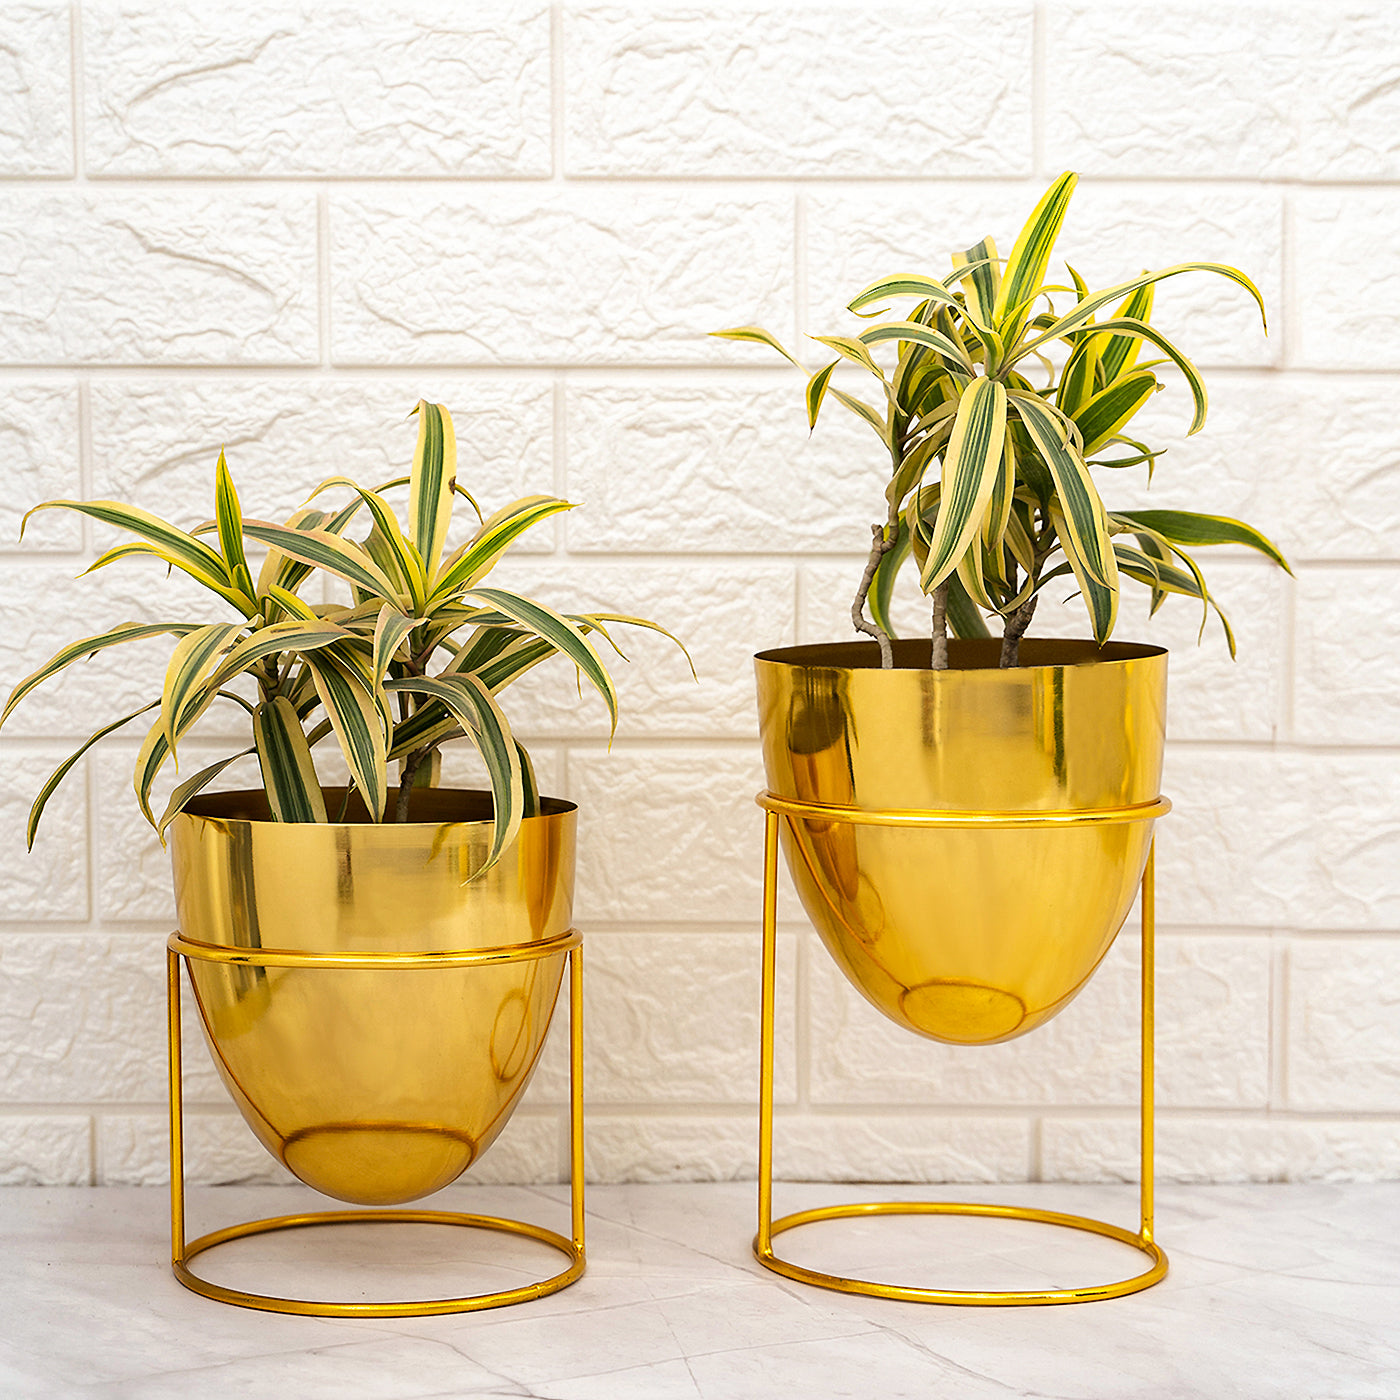 Classy Tabletop Planter With Stand Set of 2